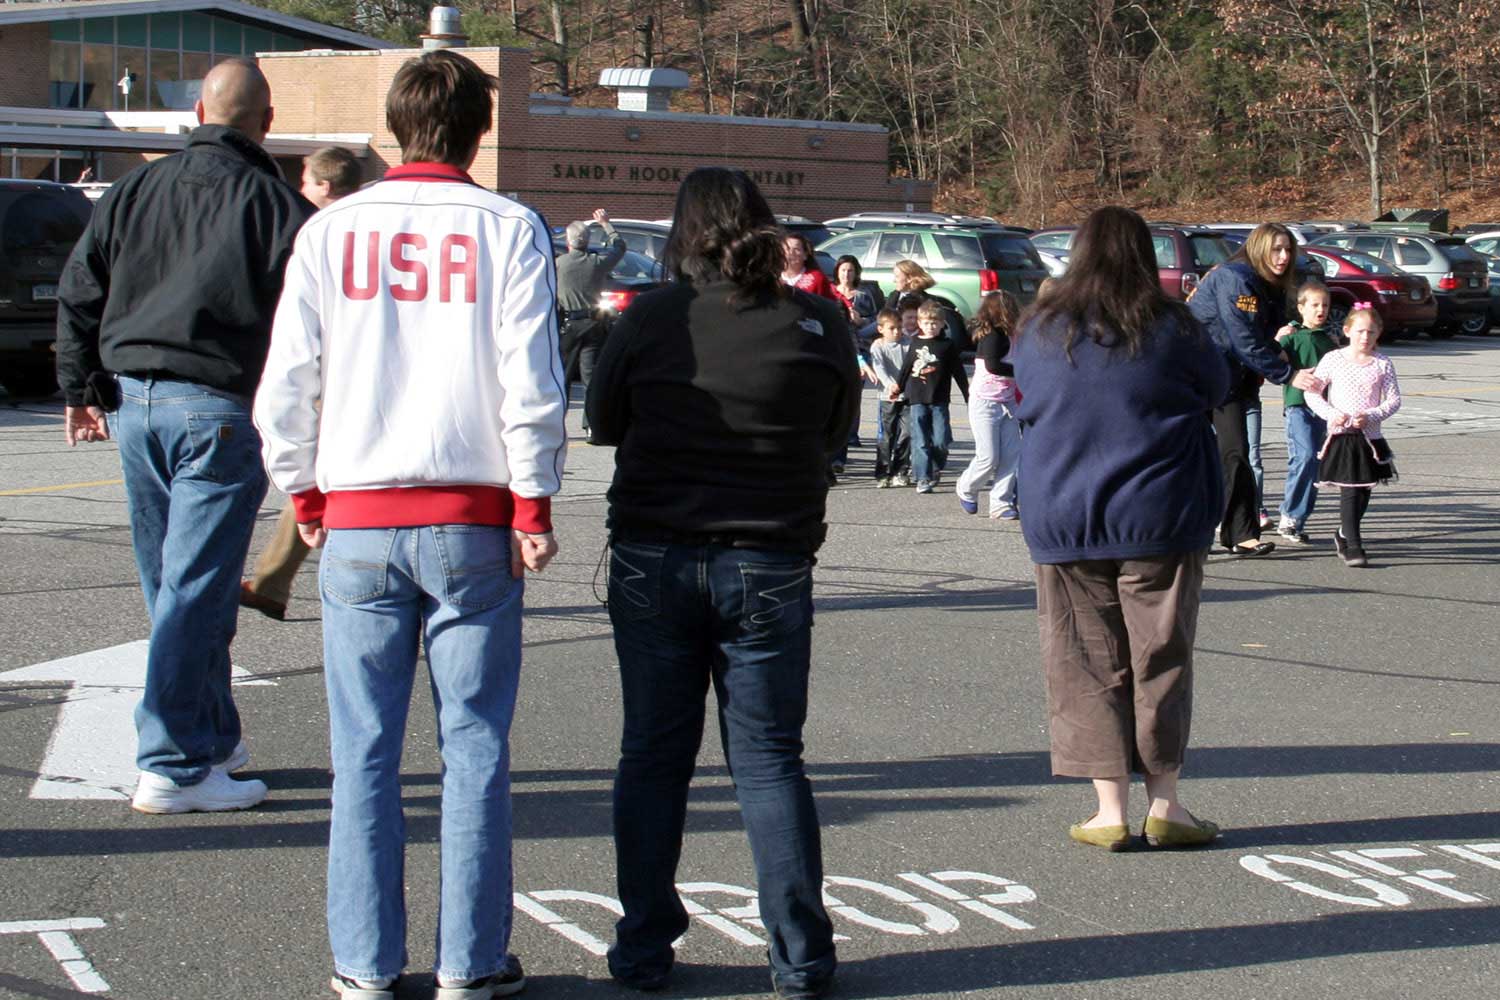 People look on as students are led out of Sandy Hook Elementary School in Newtown, Conn.